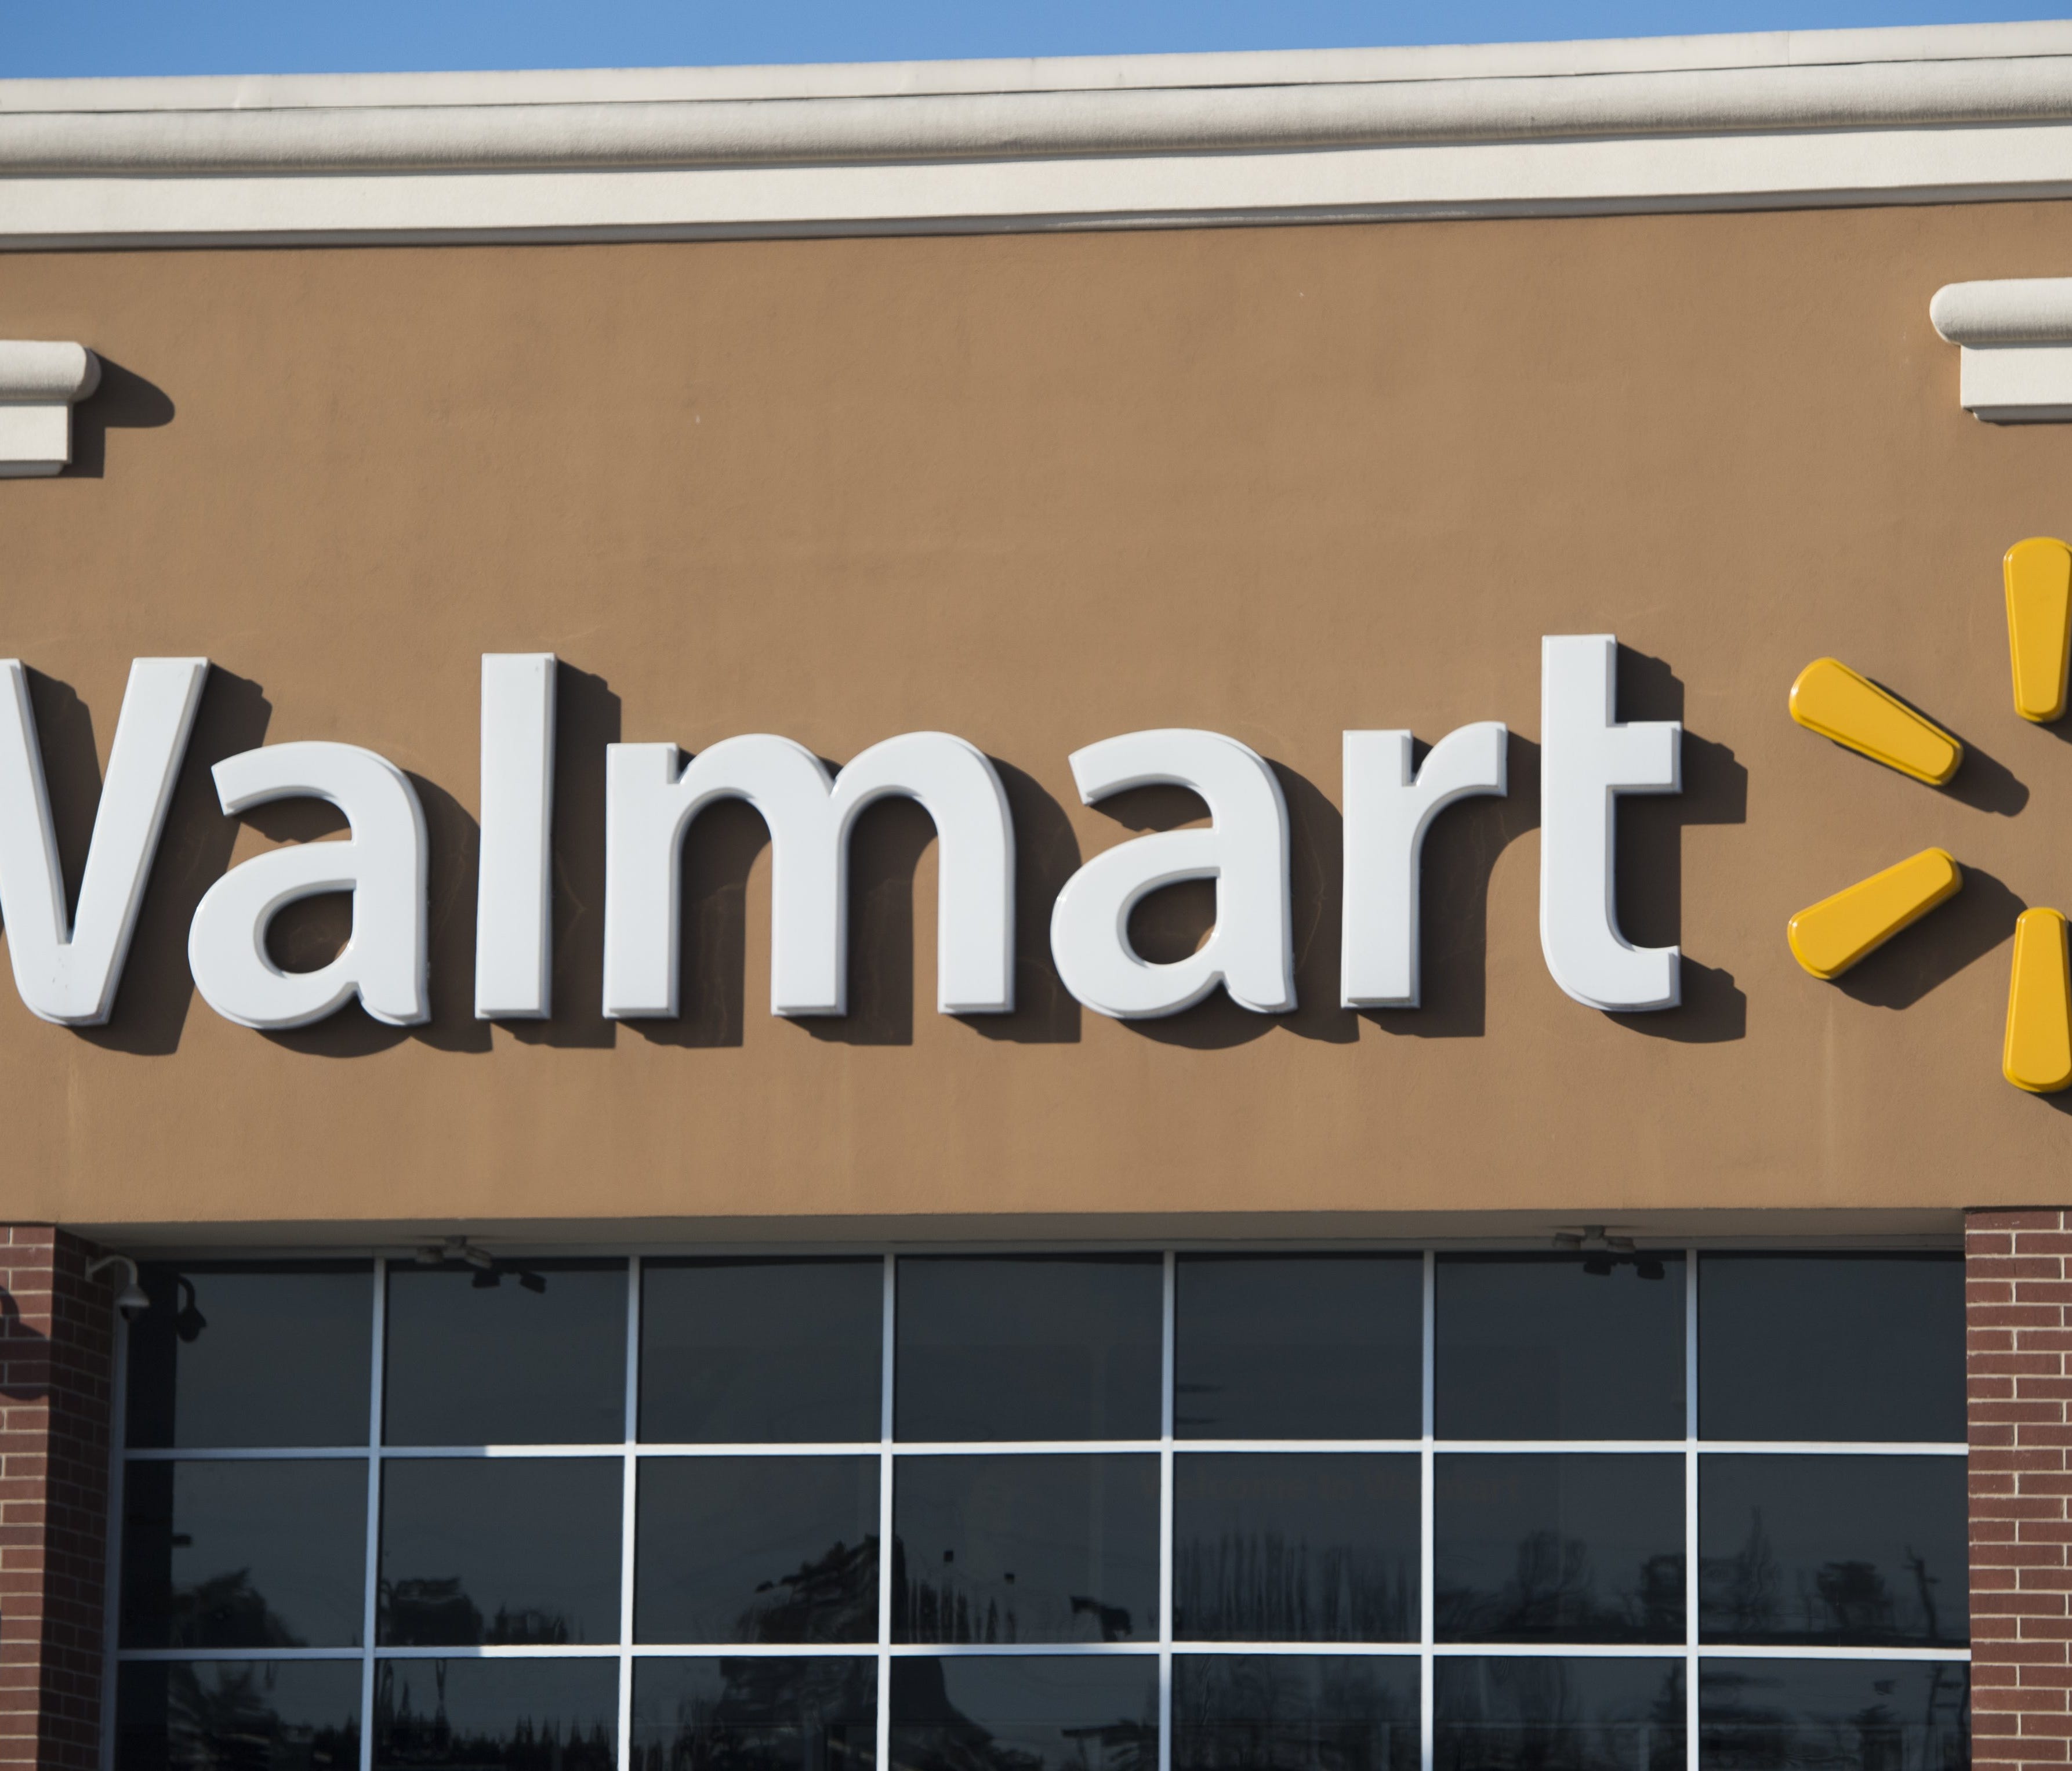 Walmart says that 63 Sam's Club locations will be closing to become new regional distribution centers or shutting down for good starting today.